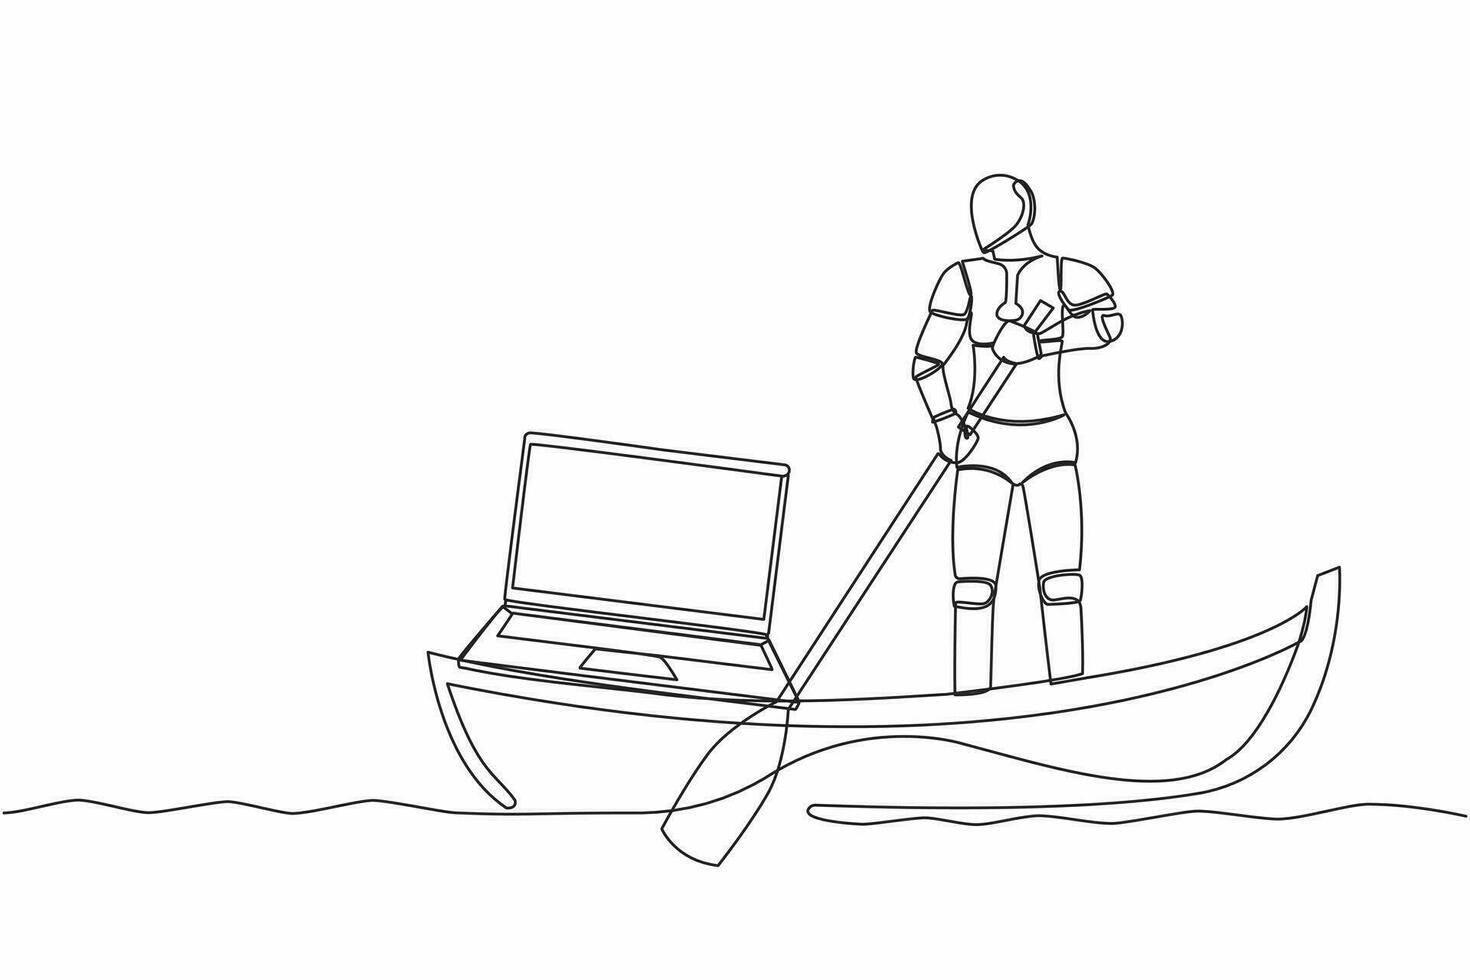 Single one line drawing of robot sailing away on boat with laptop computer. Freelance or remote work at ship. Modern robotic artificial intelligence. Continuous line design graphic vector illustration